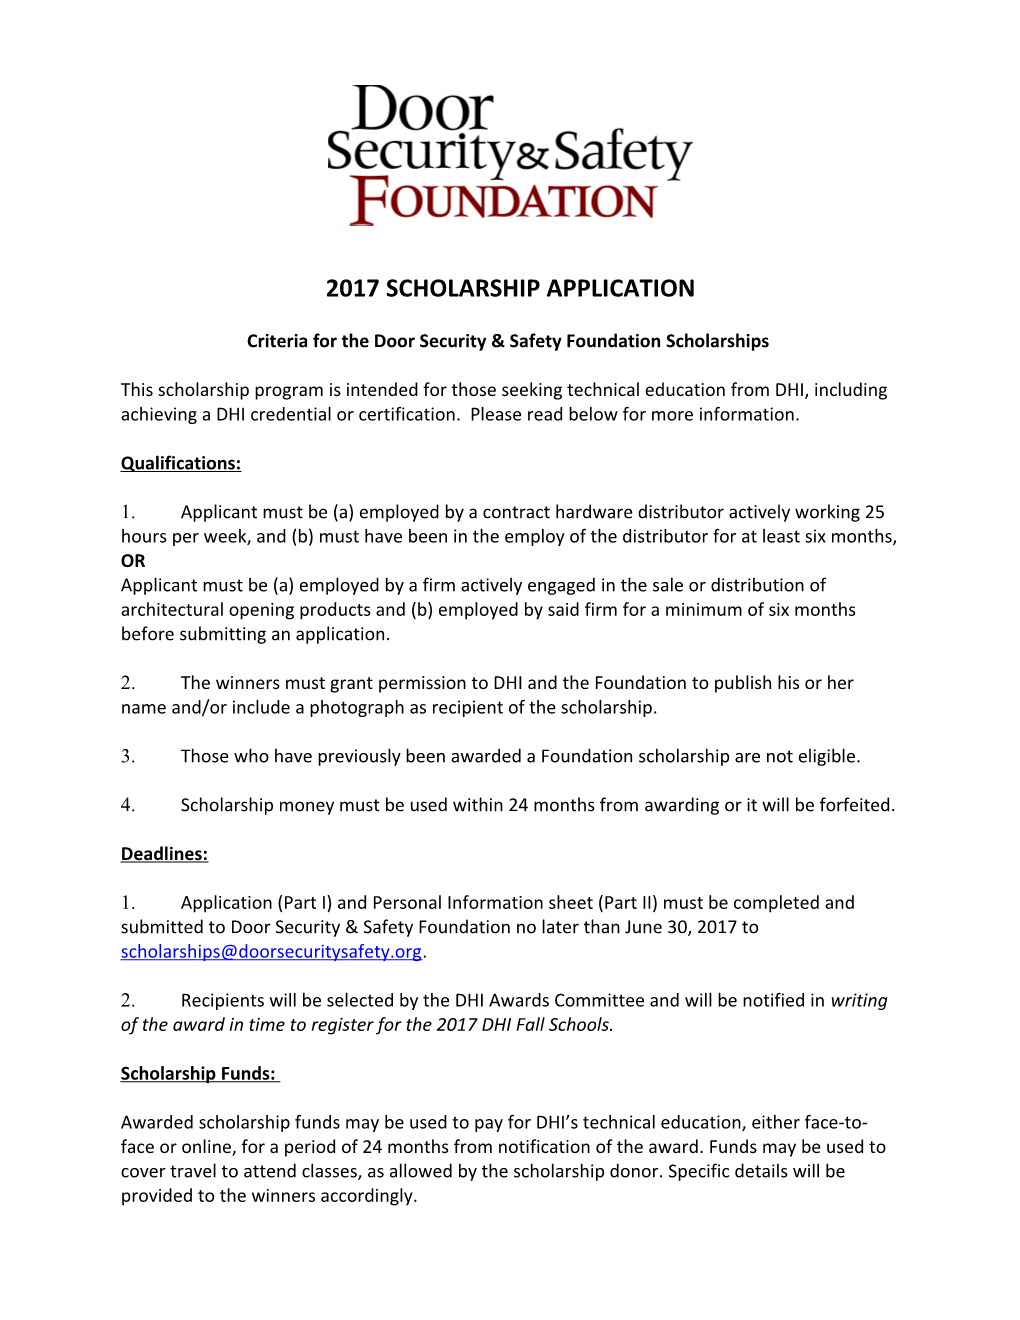 Criteria for the Door Security & Safety Foundation Scholarships